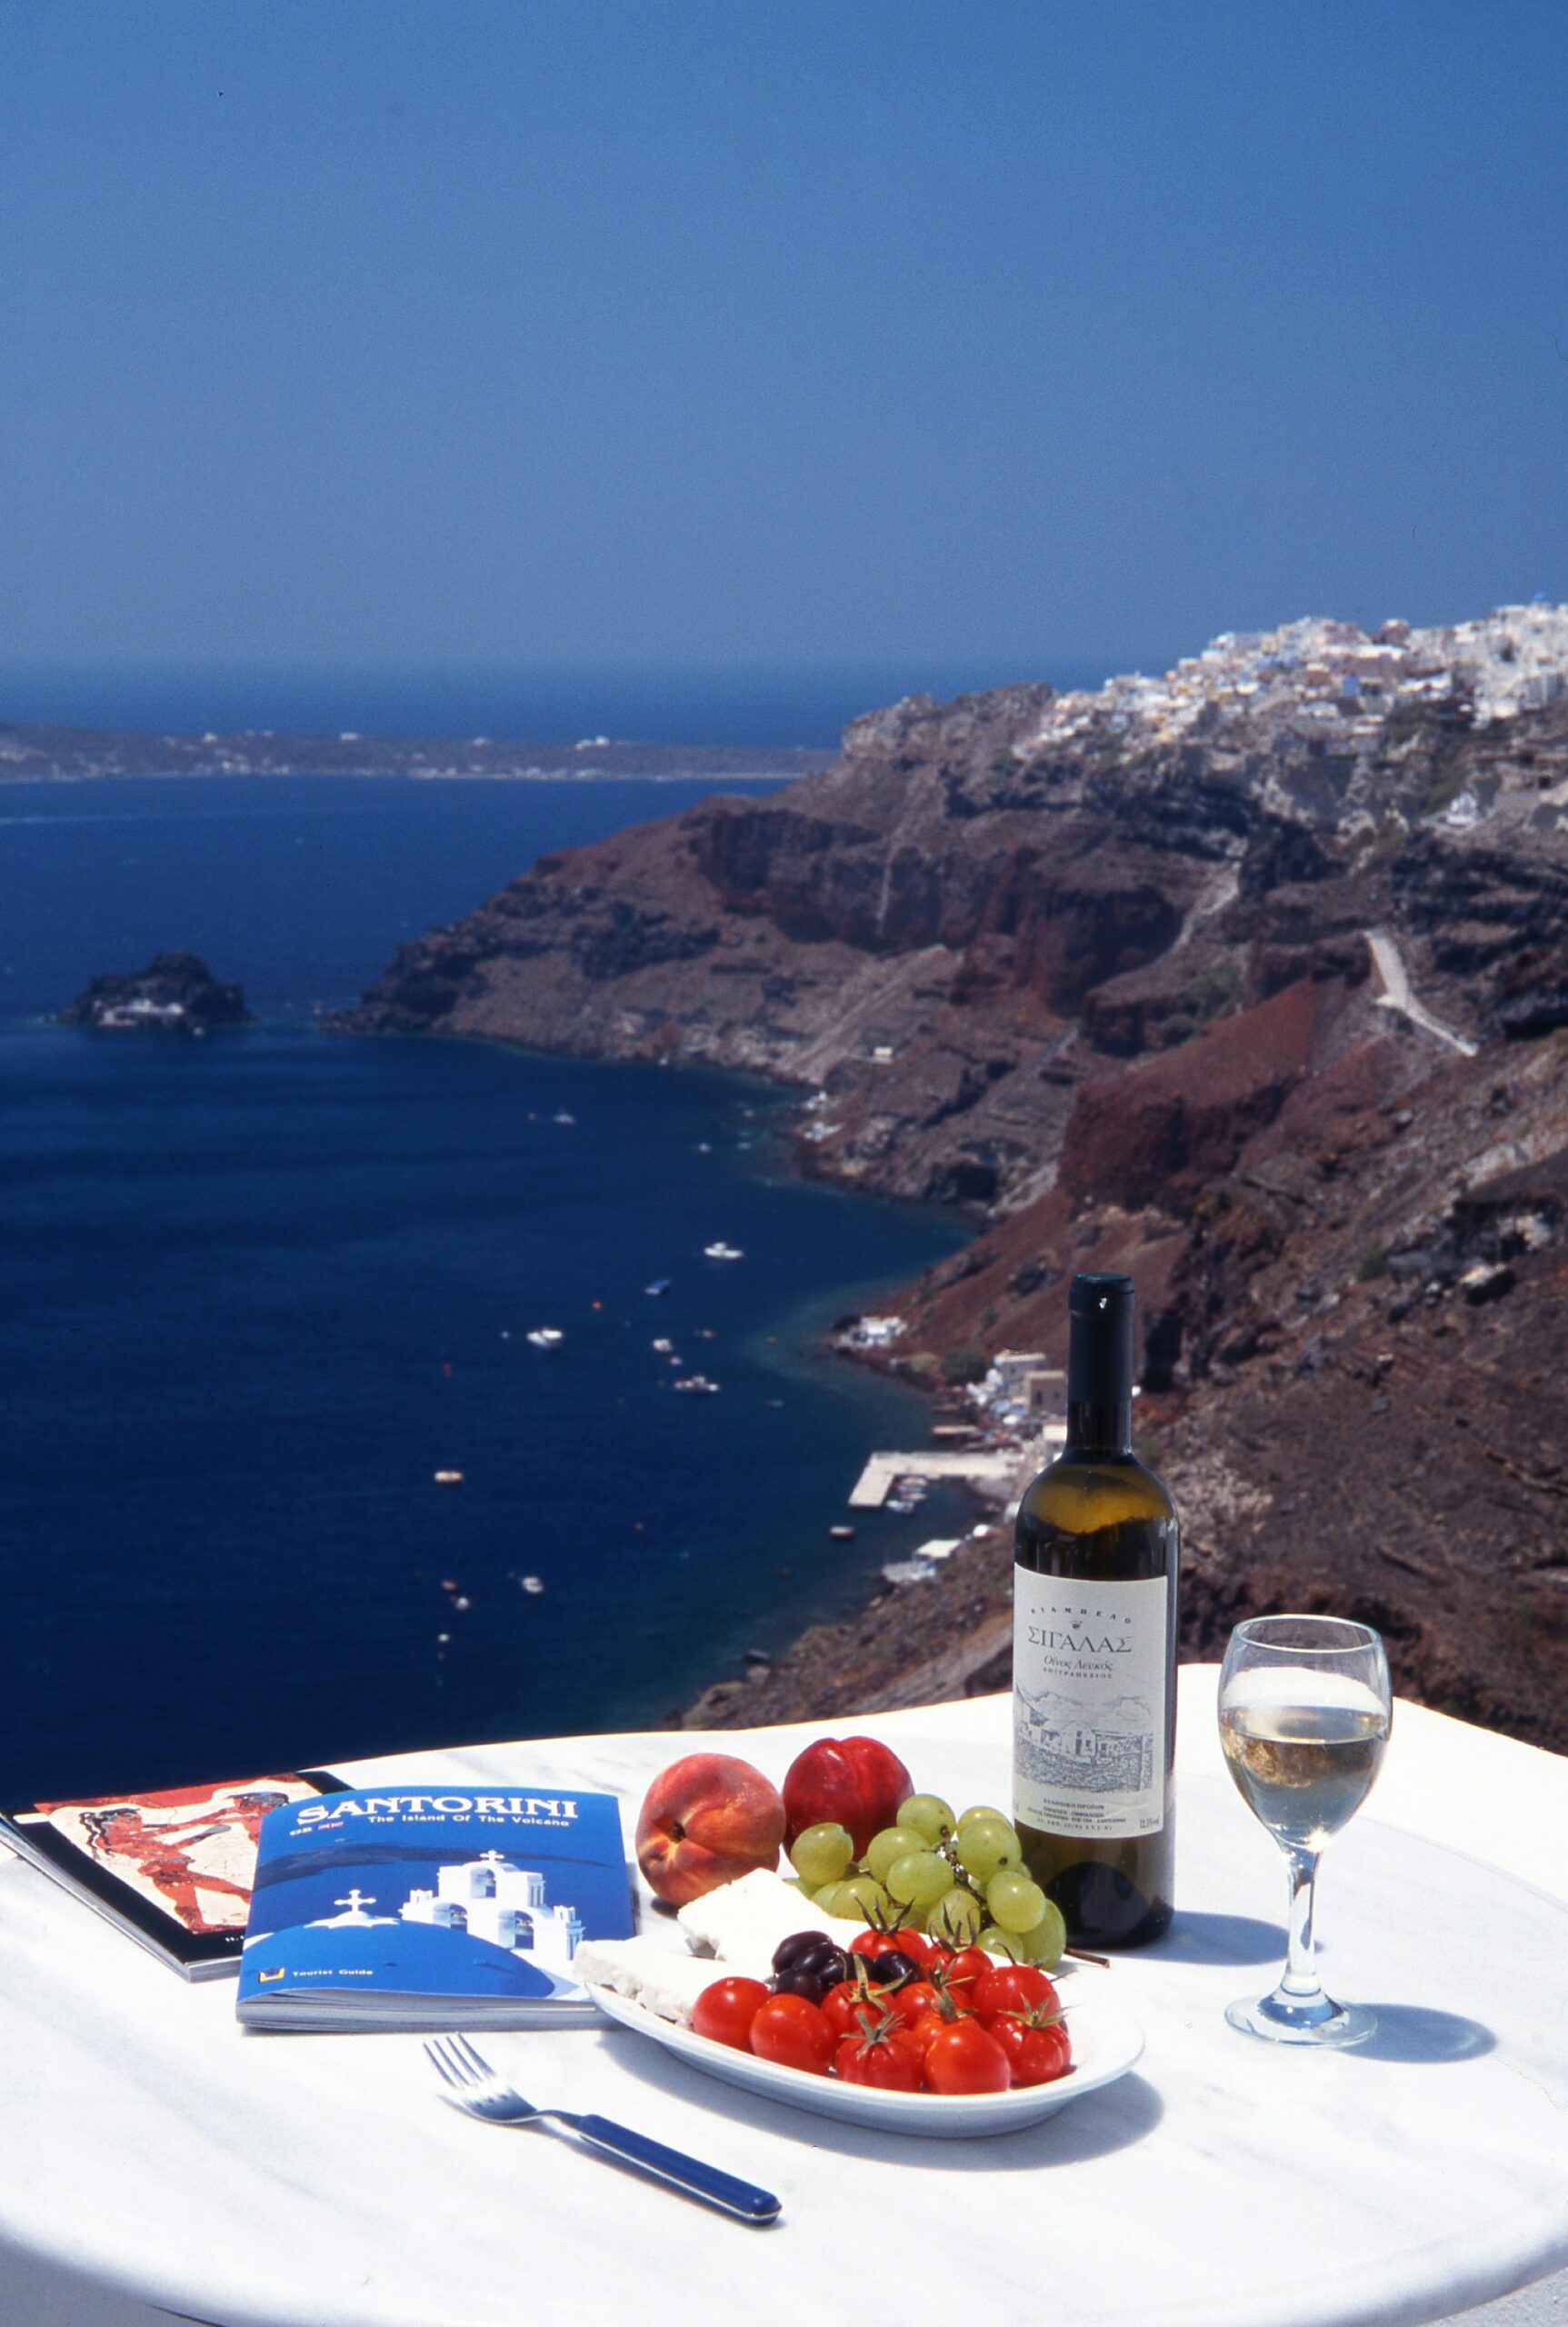 A table set with wine, fruit, and a guidebook, overlooking the cliffs and sea of Santorini.